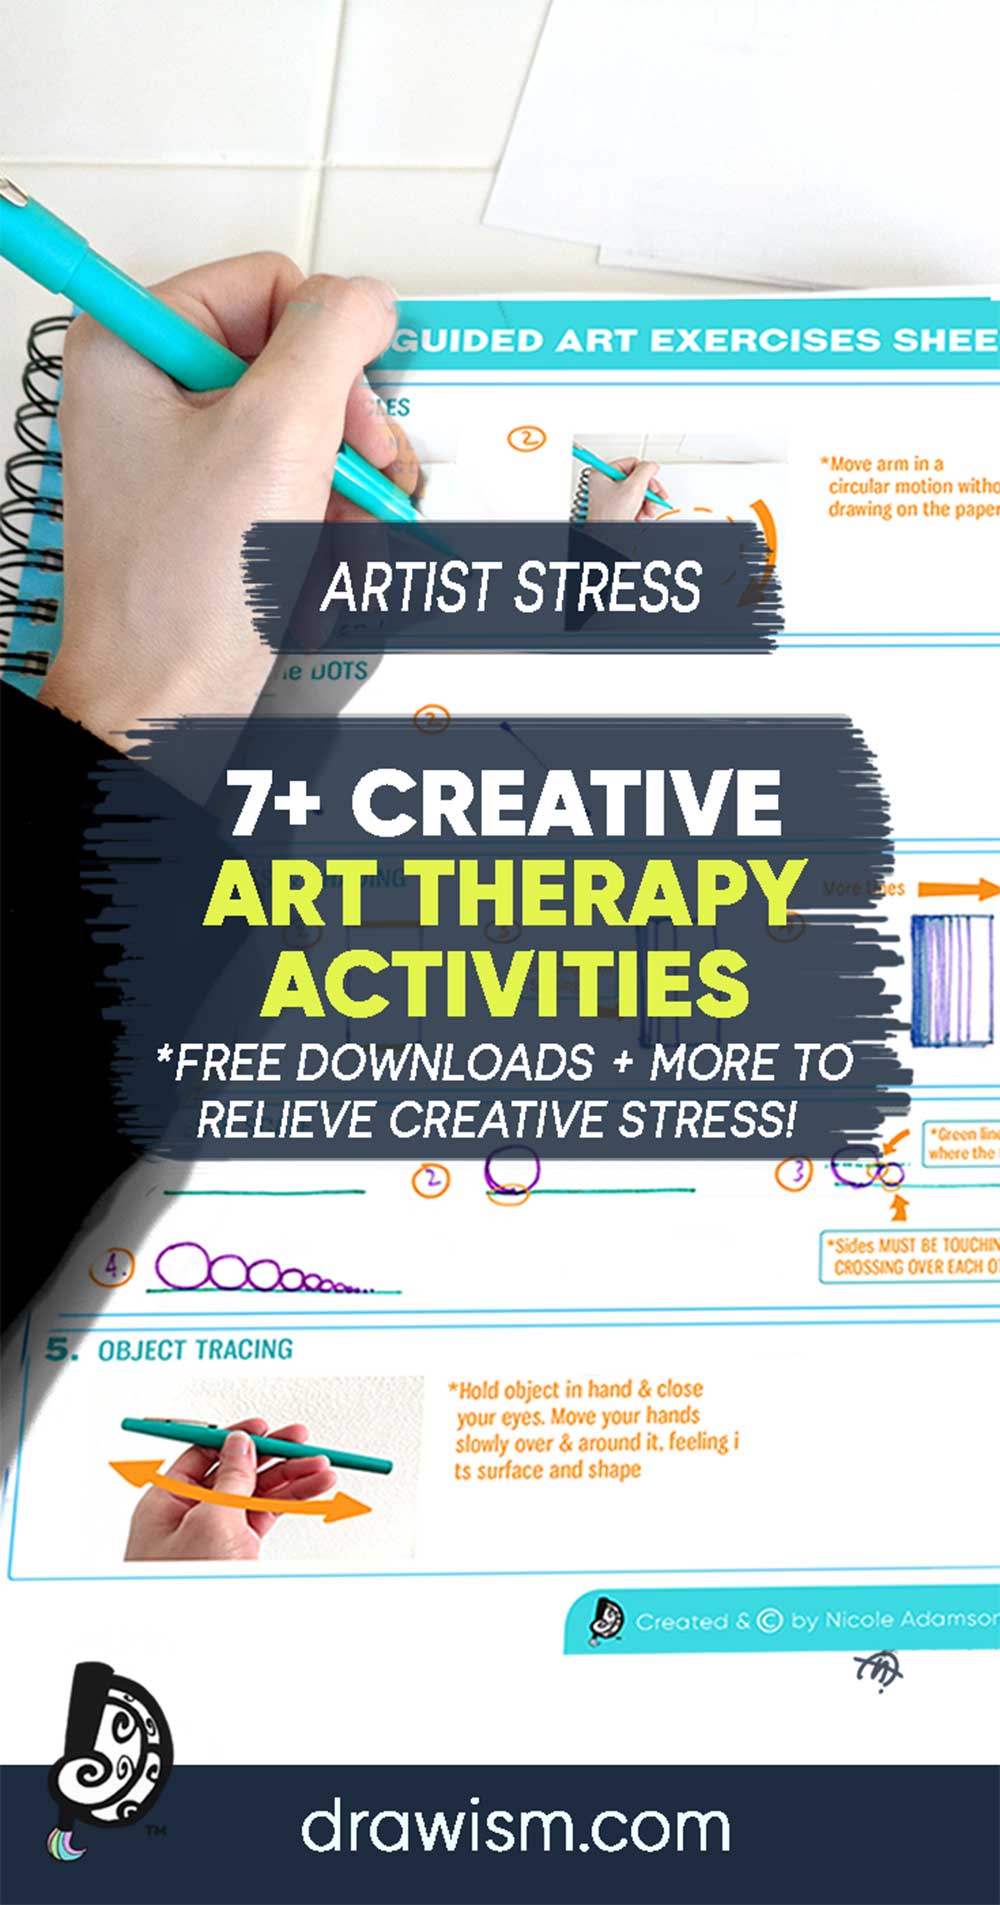 Artist Stress Creative Art Therapy Activities and Art Tips for Artists with Free Downloads, and Printables